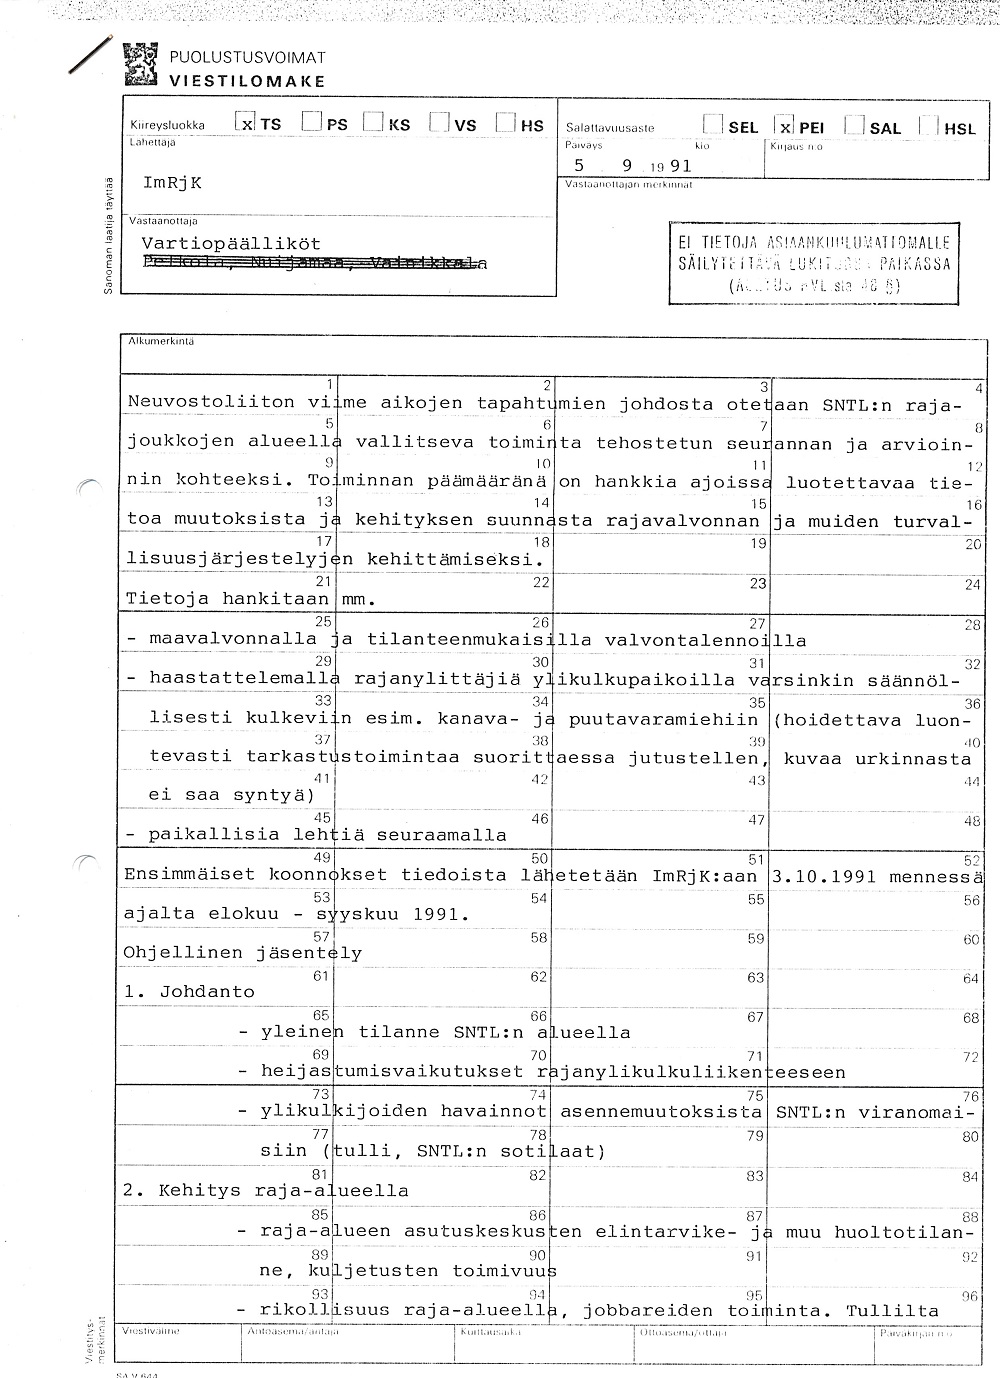 Southeast Finland Border Guard District command sheet from August 1991.